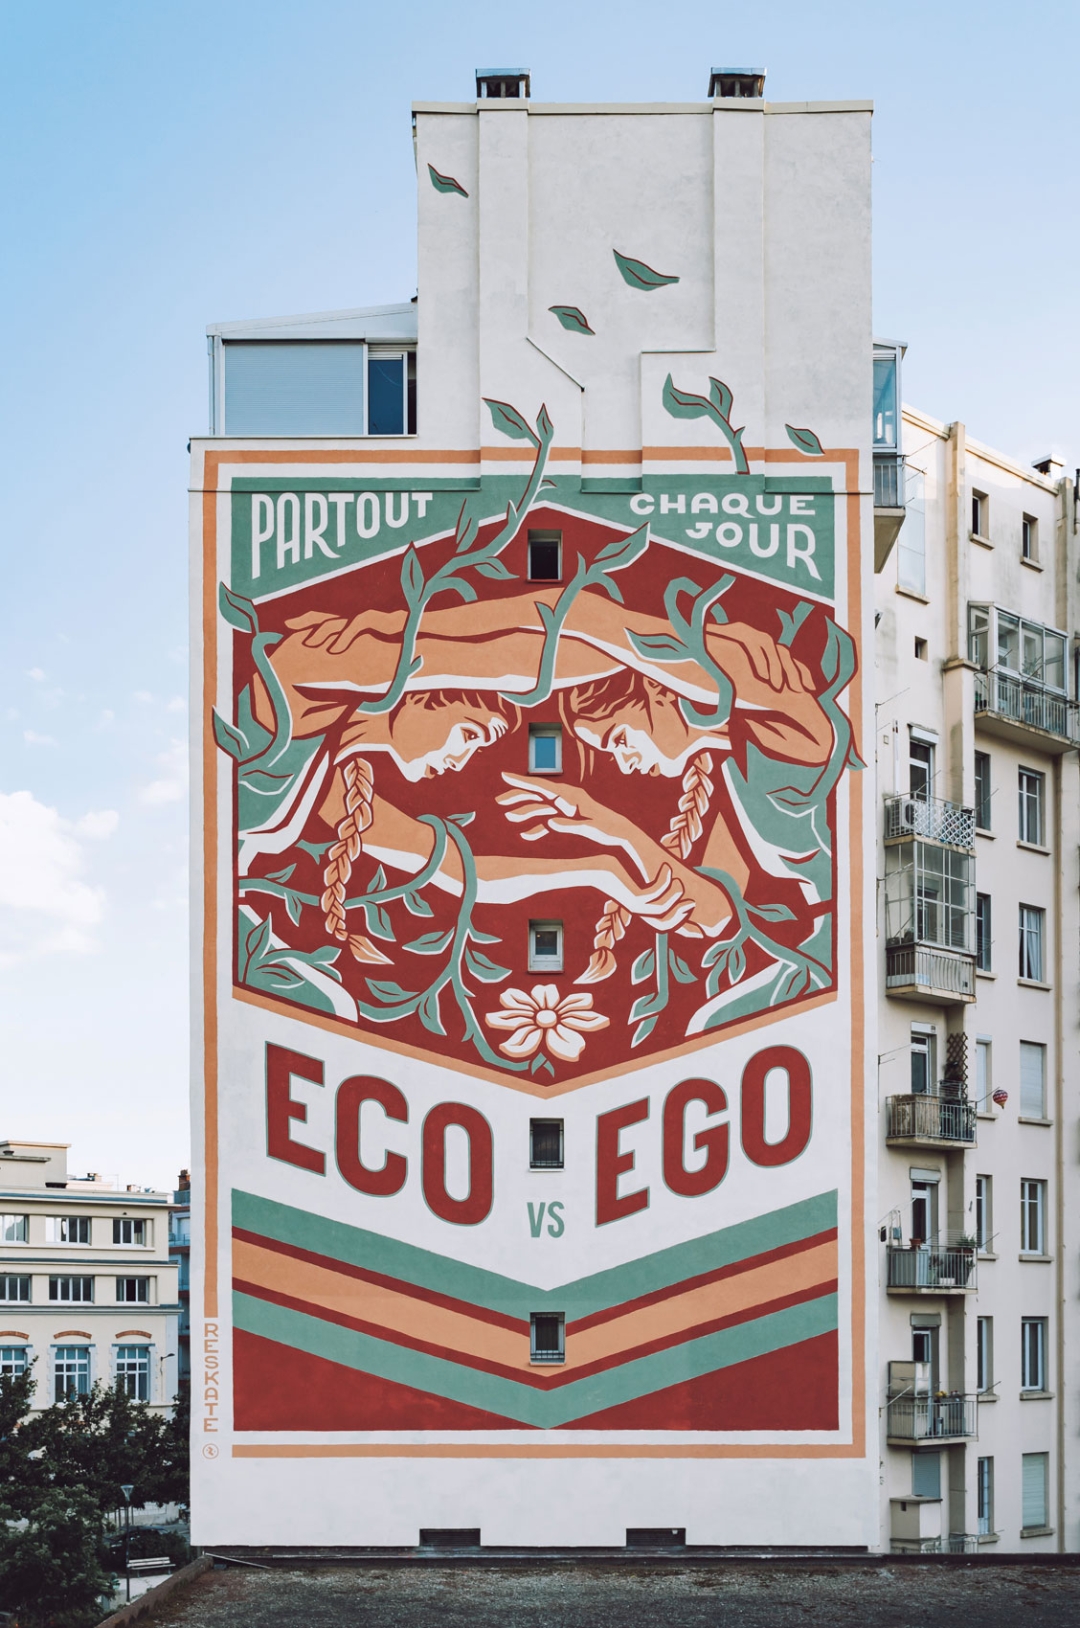 A mural with a retro poster aesthetic created by Reskate Studio in Grenoble (France)